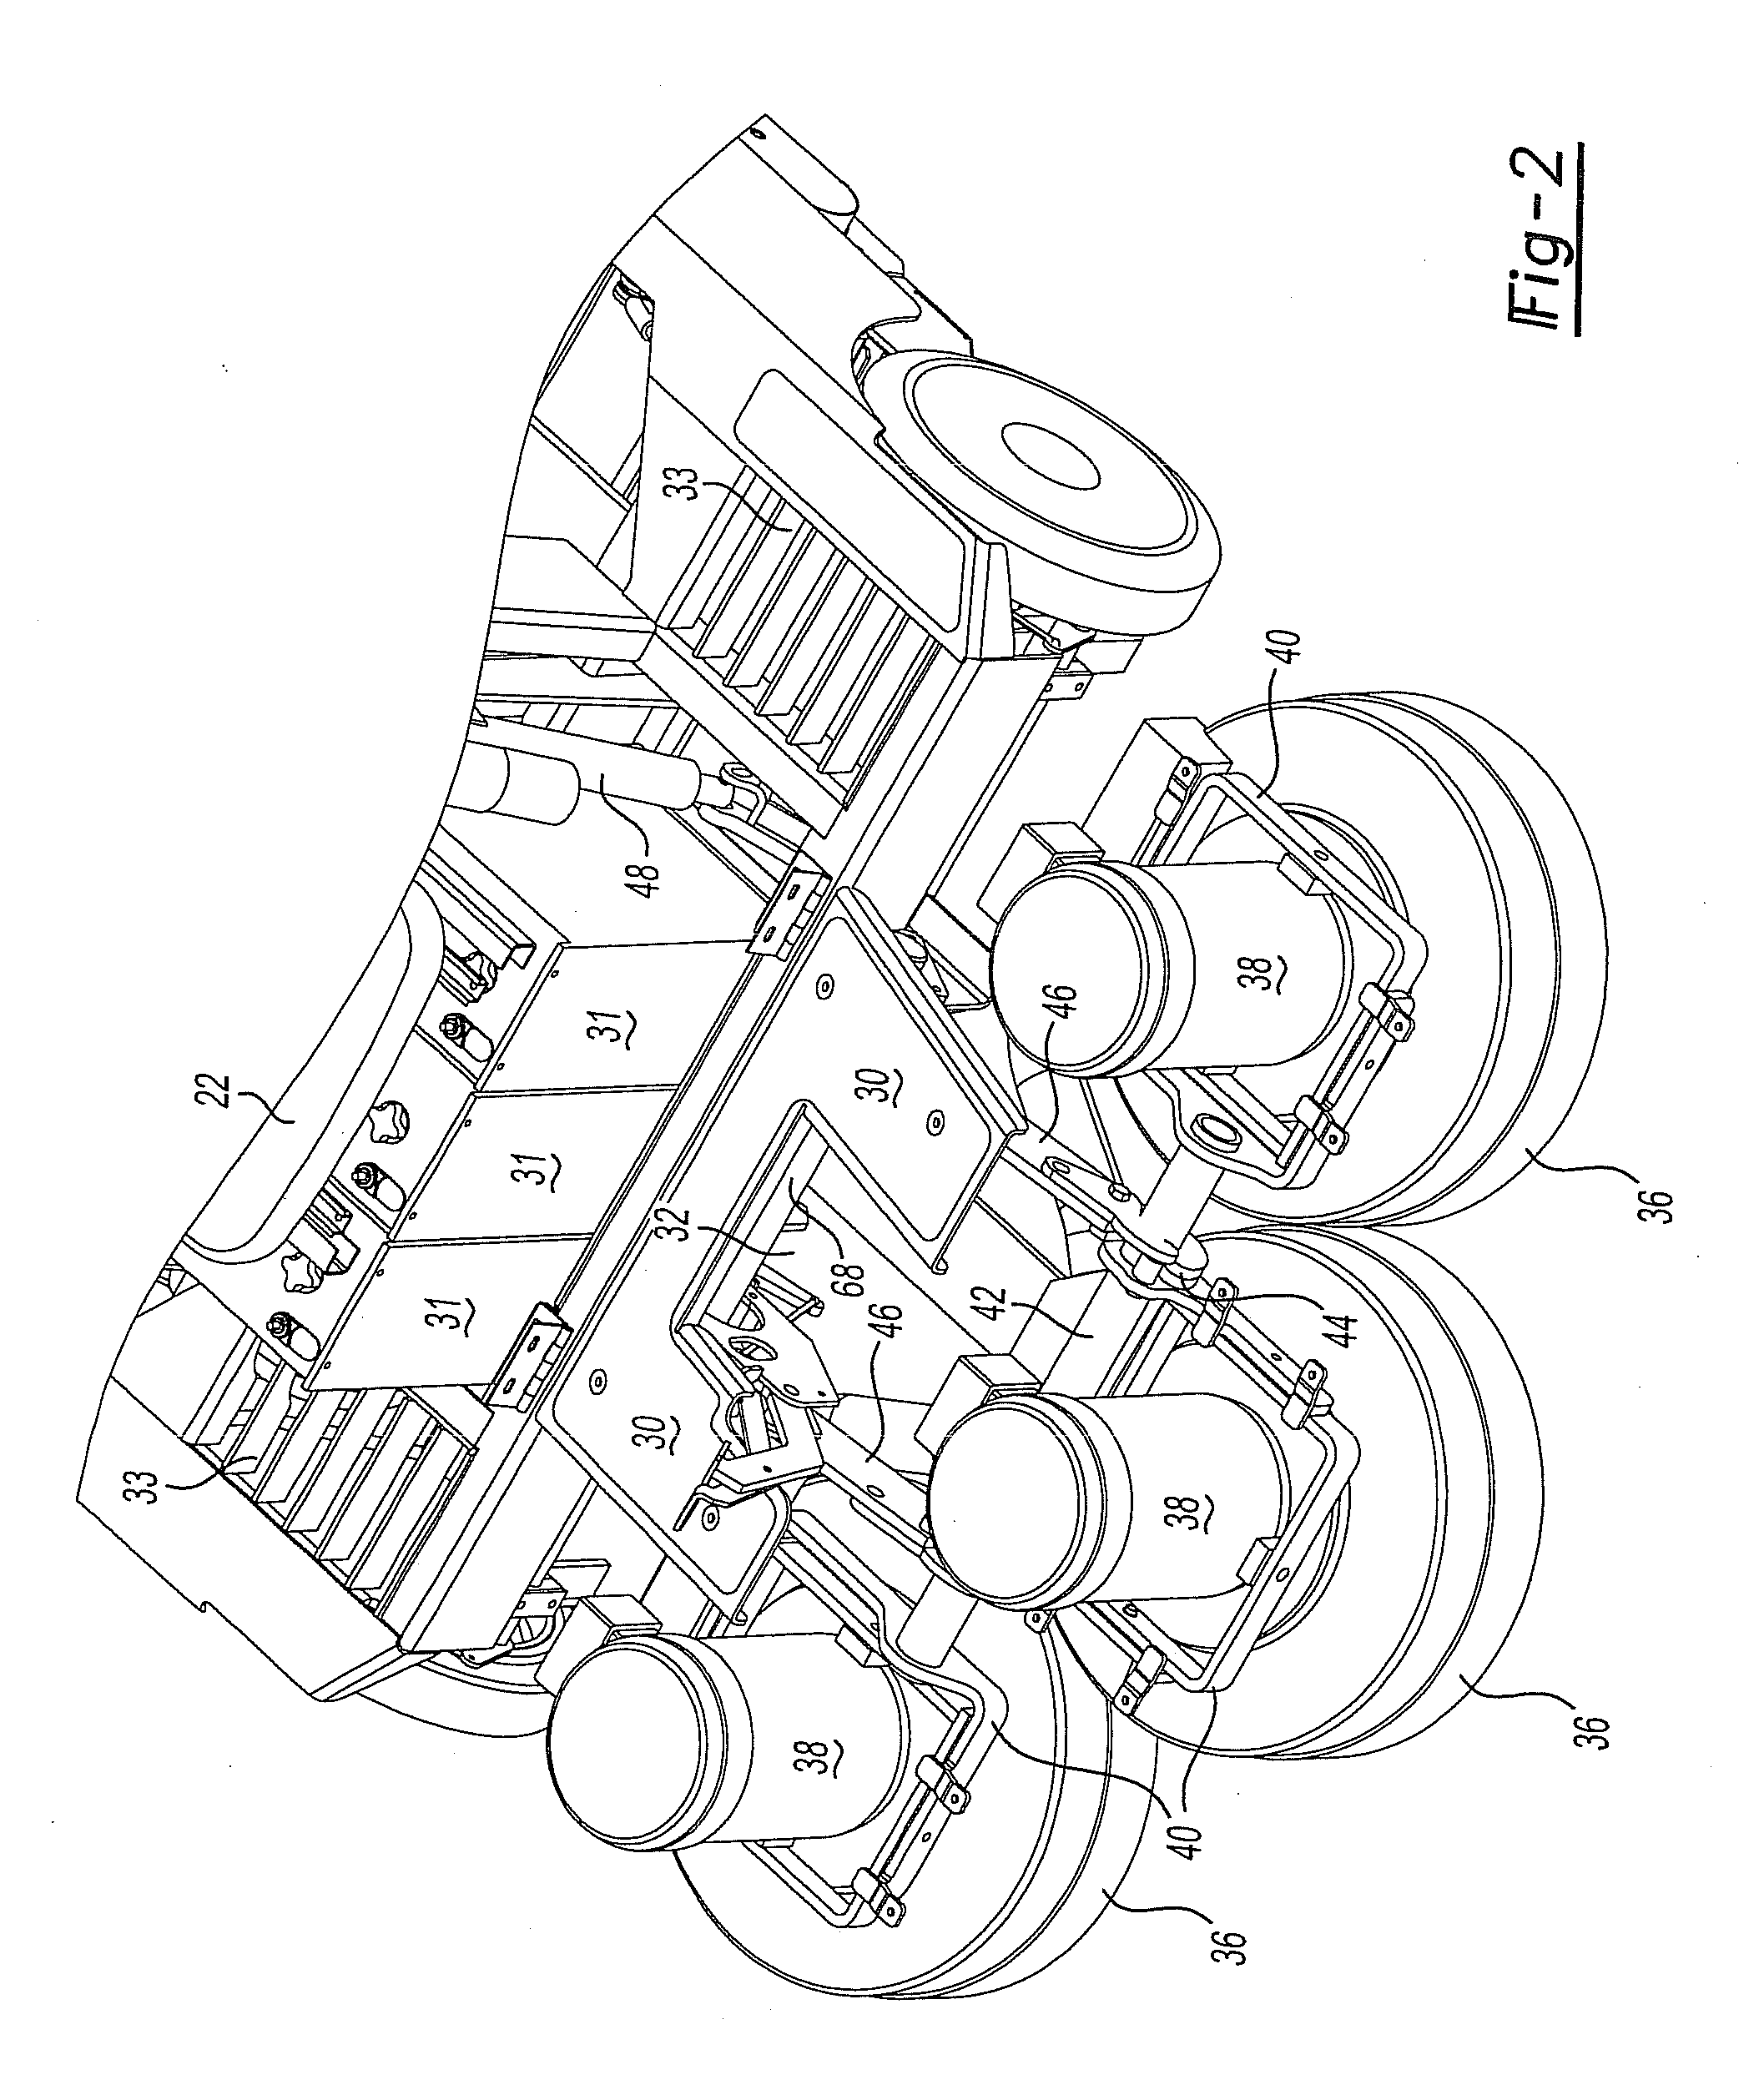 Riding Apparatus for Polishing and Cleaning Floor Surfaces